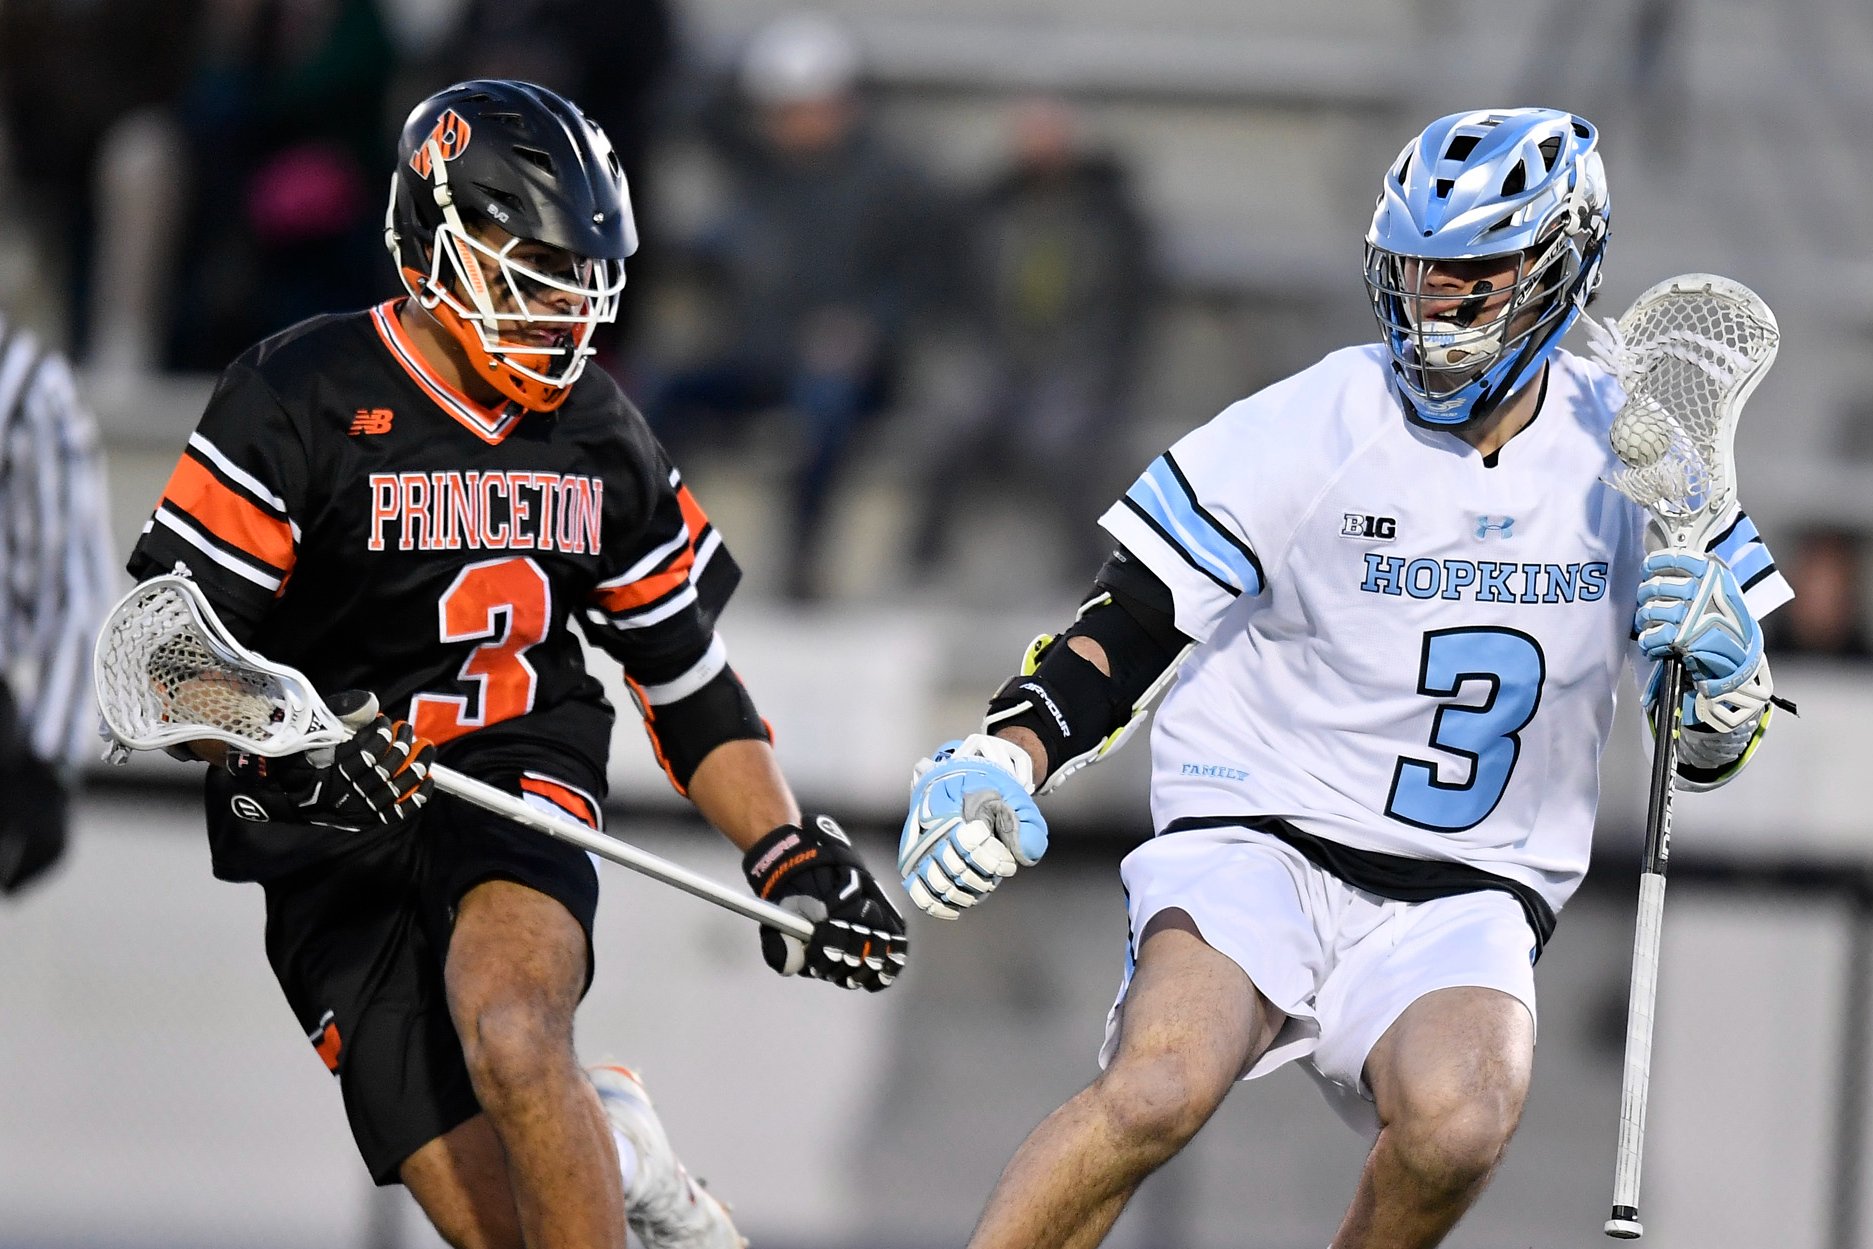 Johns Hopkins Lacrosse Schedule 2022 Jhu Men's Lacrosse On Twitter: "News - Due To Schedule Adjustments On Both  Sides, Hopkins Will Not Play @Tigerlacrosse In 2022. Coaches Already  Working On New Date For 2023. #Gohop Https://T.co/Ixxg1Wgqnq" /